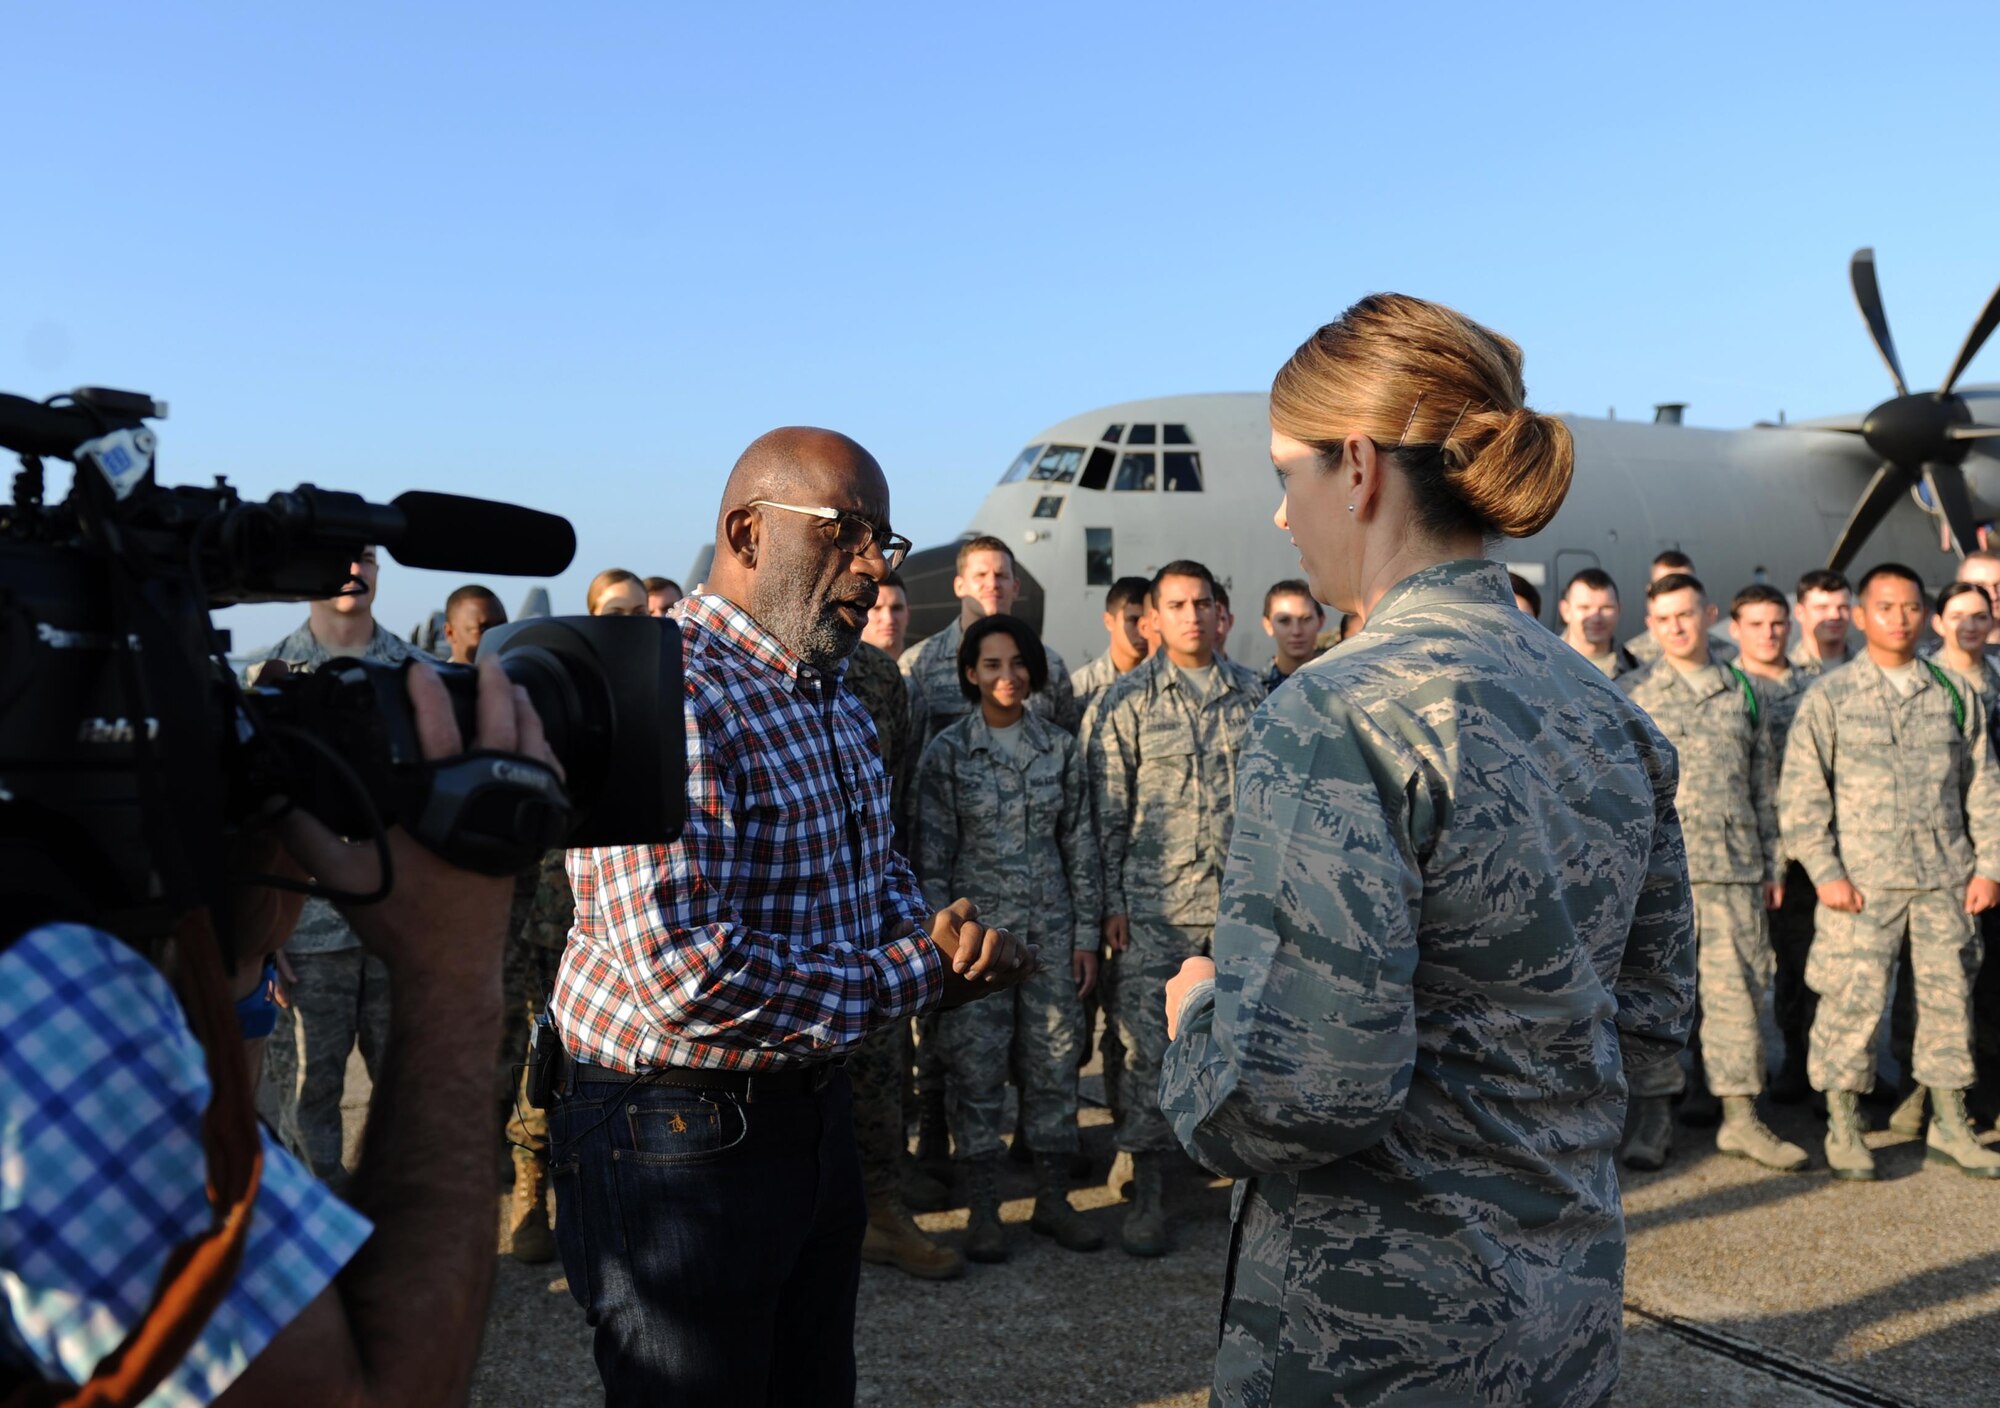 Al Roker, TODAY Show weather anchor, speaks with Col. Michele Edmondson, 81st Training Wing commander, following Roker’s weather report during a segment of the TODAY Show on the flight line at Keesler Air Force Base, Miss. Nov. 11, 2015. Keesler was one stop during the show’s Rokerthon 2 as Roker attempts a world record by reporting national and local weather from all 50 states. (U.S. Air Force photo by Kemberly Groue)